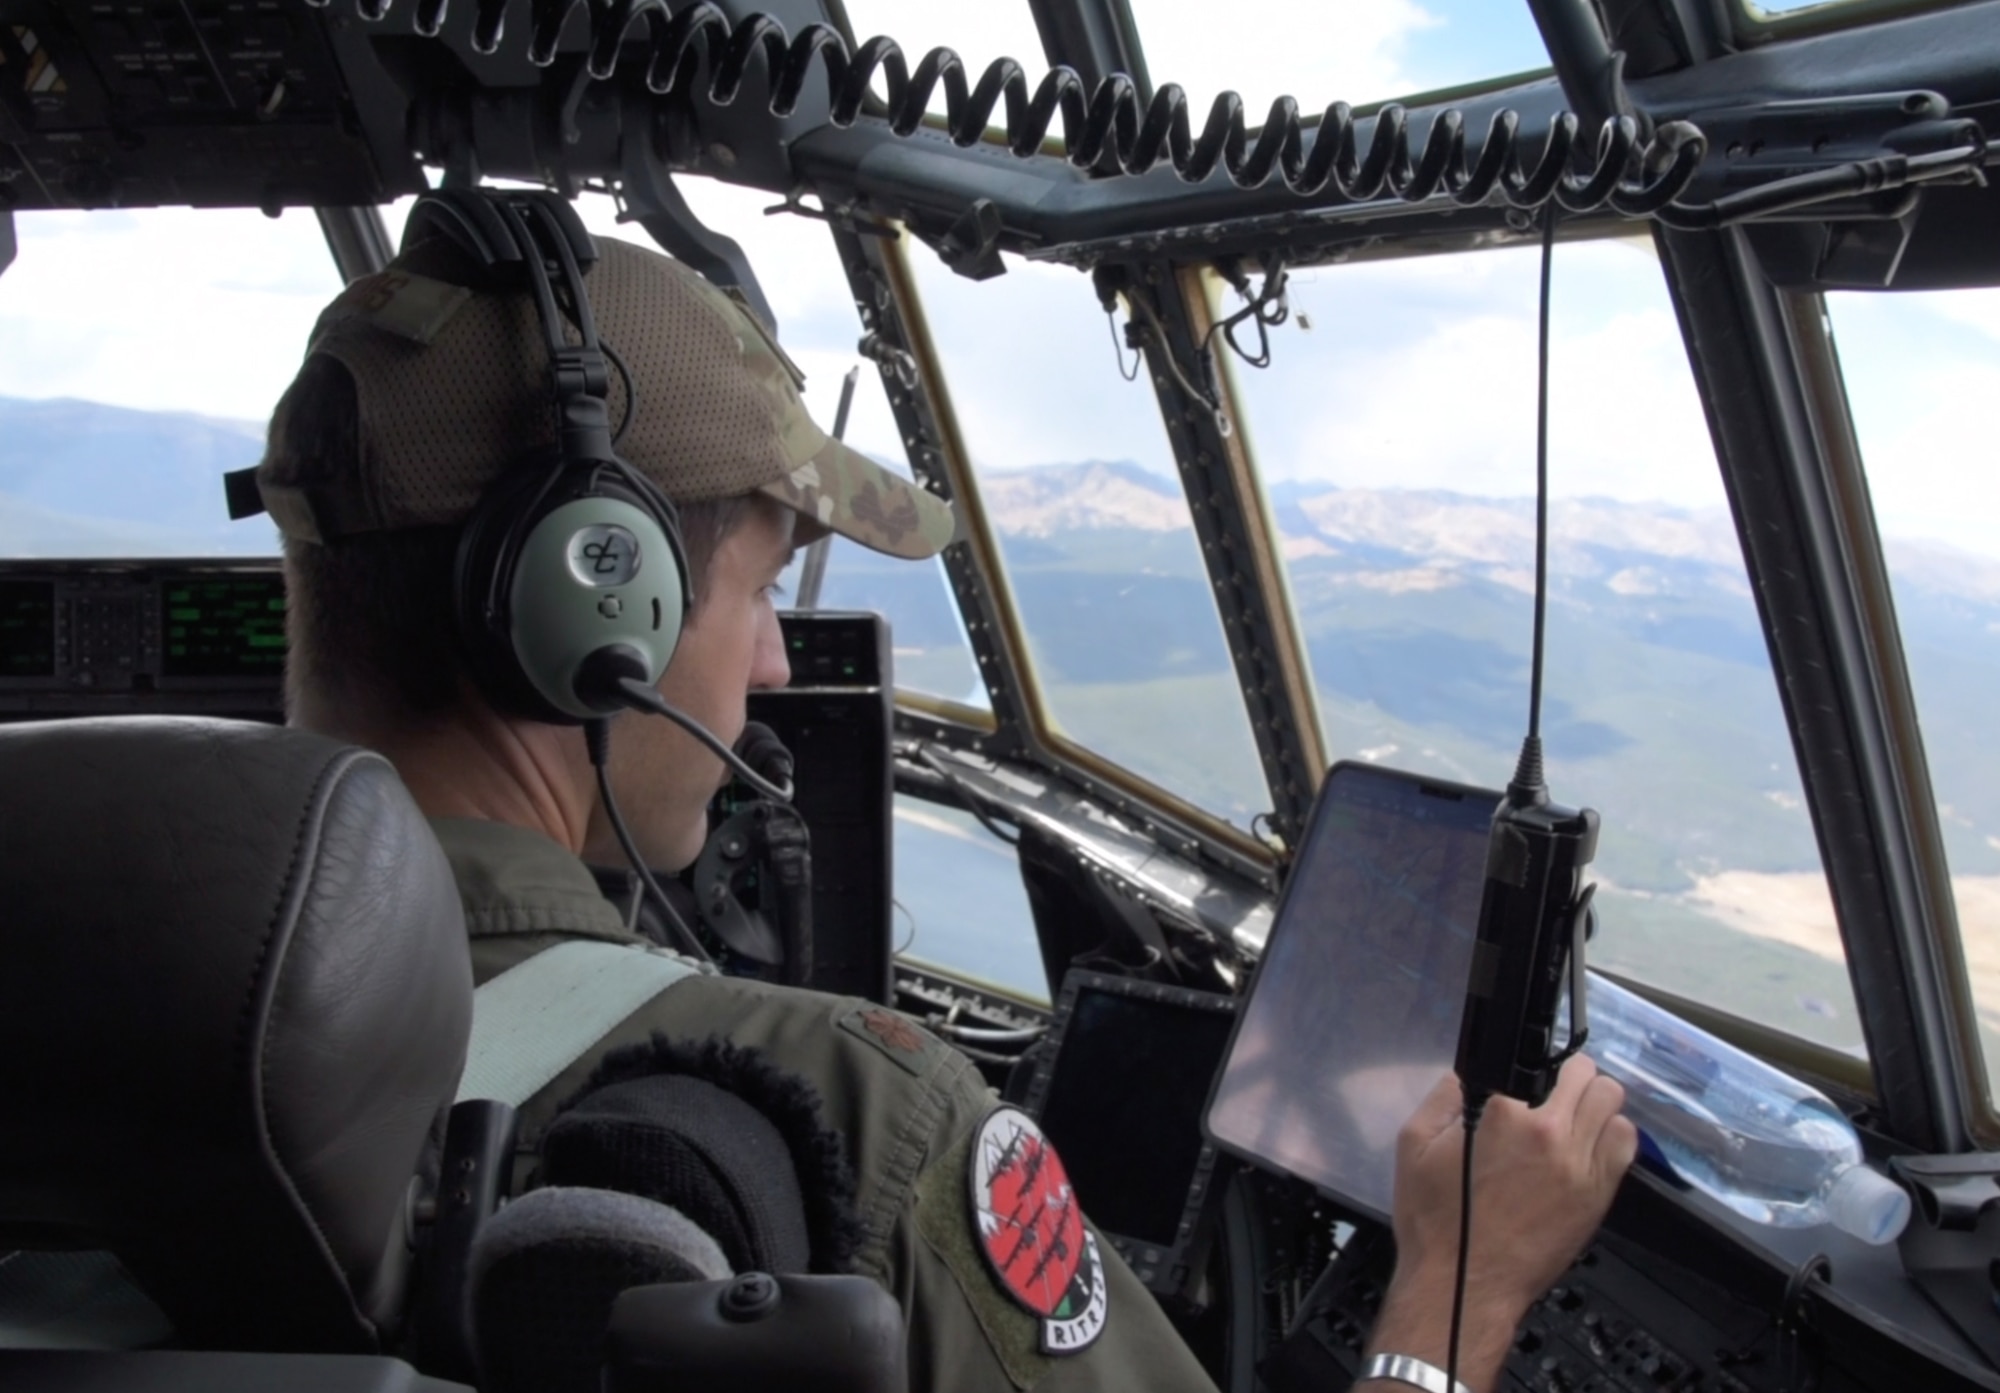 Maj. George Metros, 815th Airlift Squadron pilot, checks the navigation in preparation for landing at Vail Valley Jet Center, Gypsum, Colorado during the 22nd Air Force’s flagship exercise Rally in the Rockies Sept. 13-17, 2021. The exercise is designed to develop Airmen for combat operations by challenging them with realistic scenarios that support a full spectrum of operations during military actions, operations or hostile environments. (U.S. Air Force photo by Master Sgt. Jessica Kendziorek)